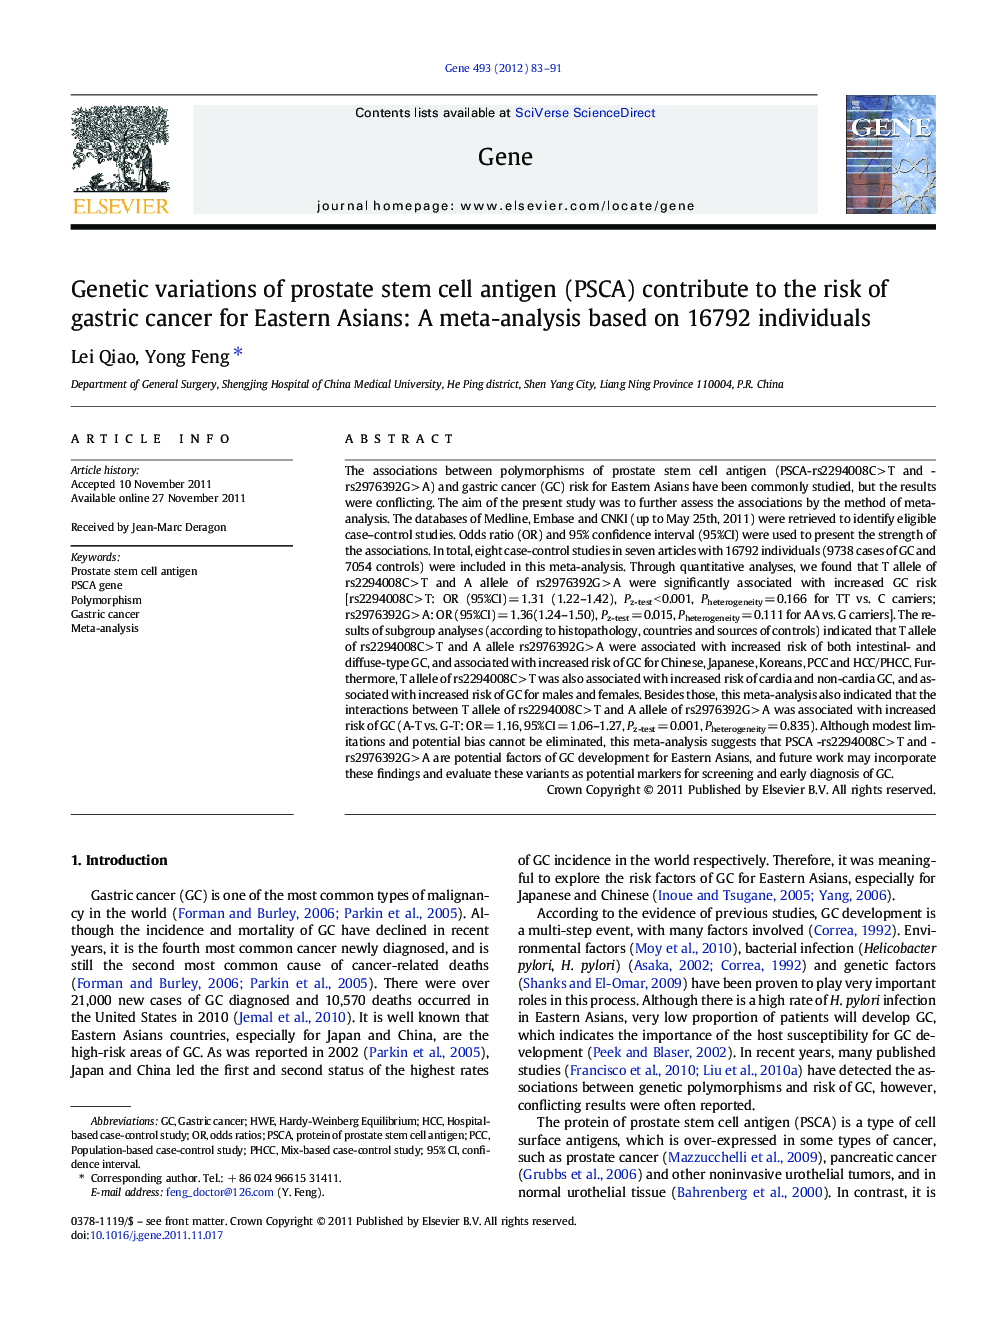 Genetic variations of prostate stem cell antigen (PSCA) contribute to the risk of gastric cancer for Eastern Asians: A meta-analysis based on 16792 individuals